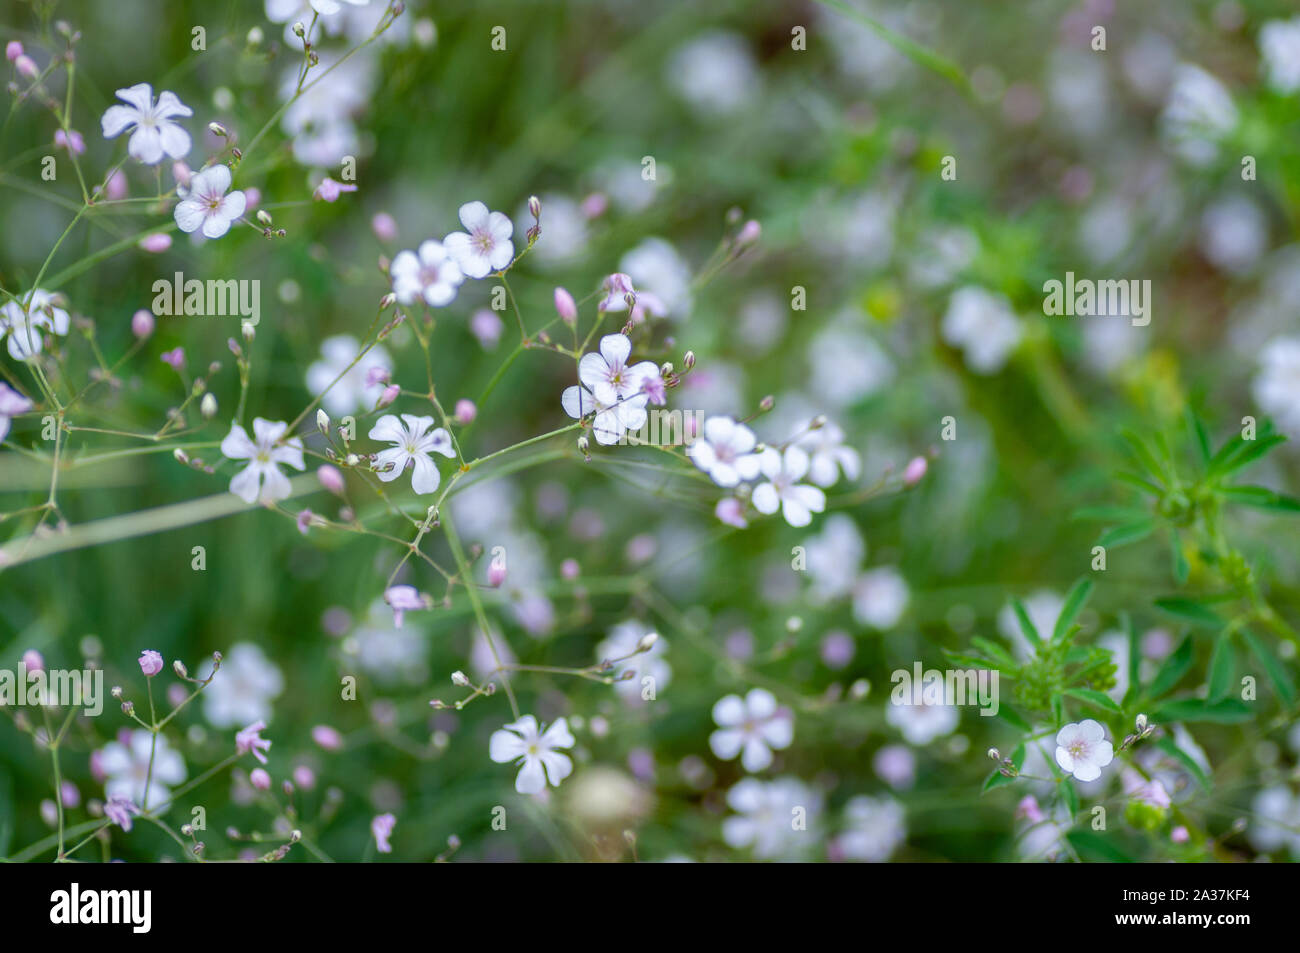 Saxifraga blooming flowers, stoloniferous perennial herb in Altai. Stock Photo